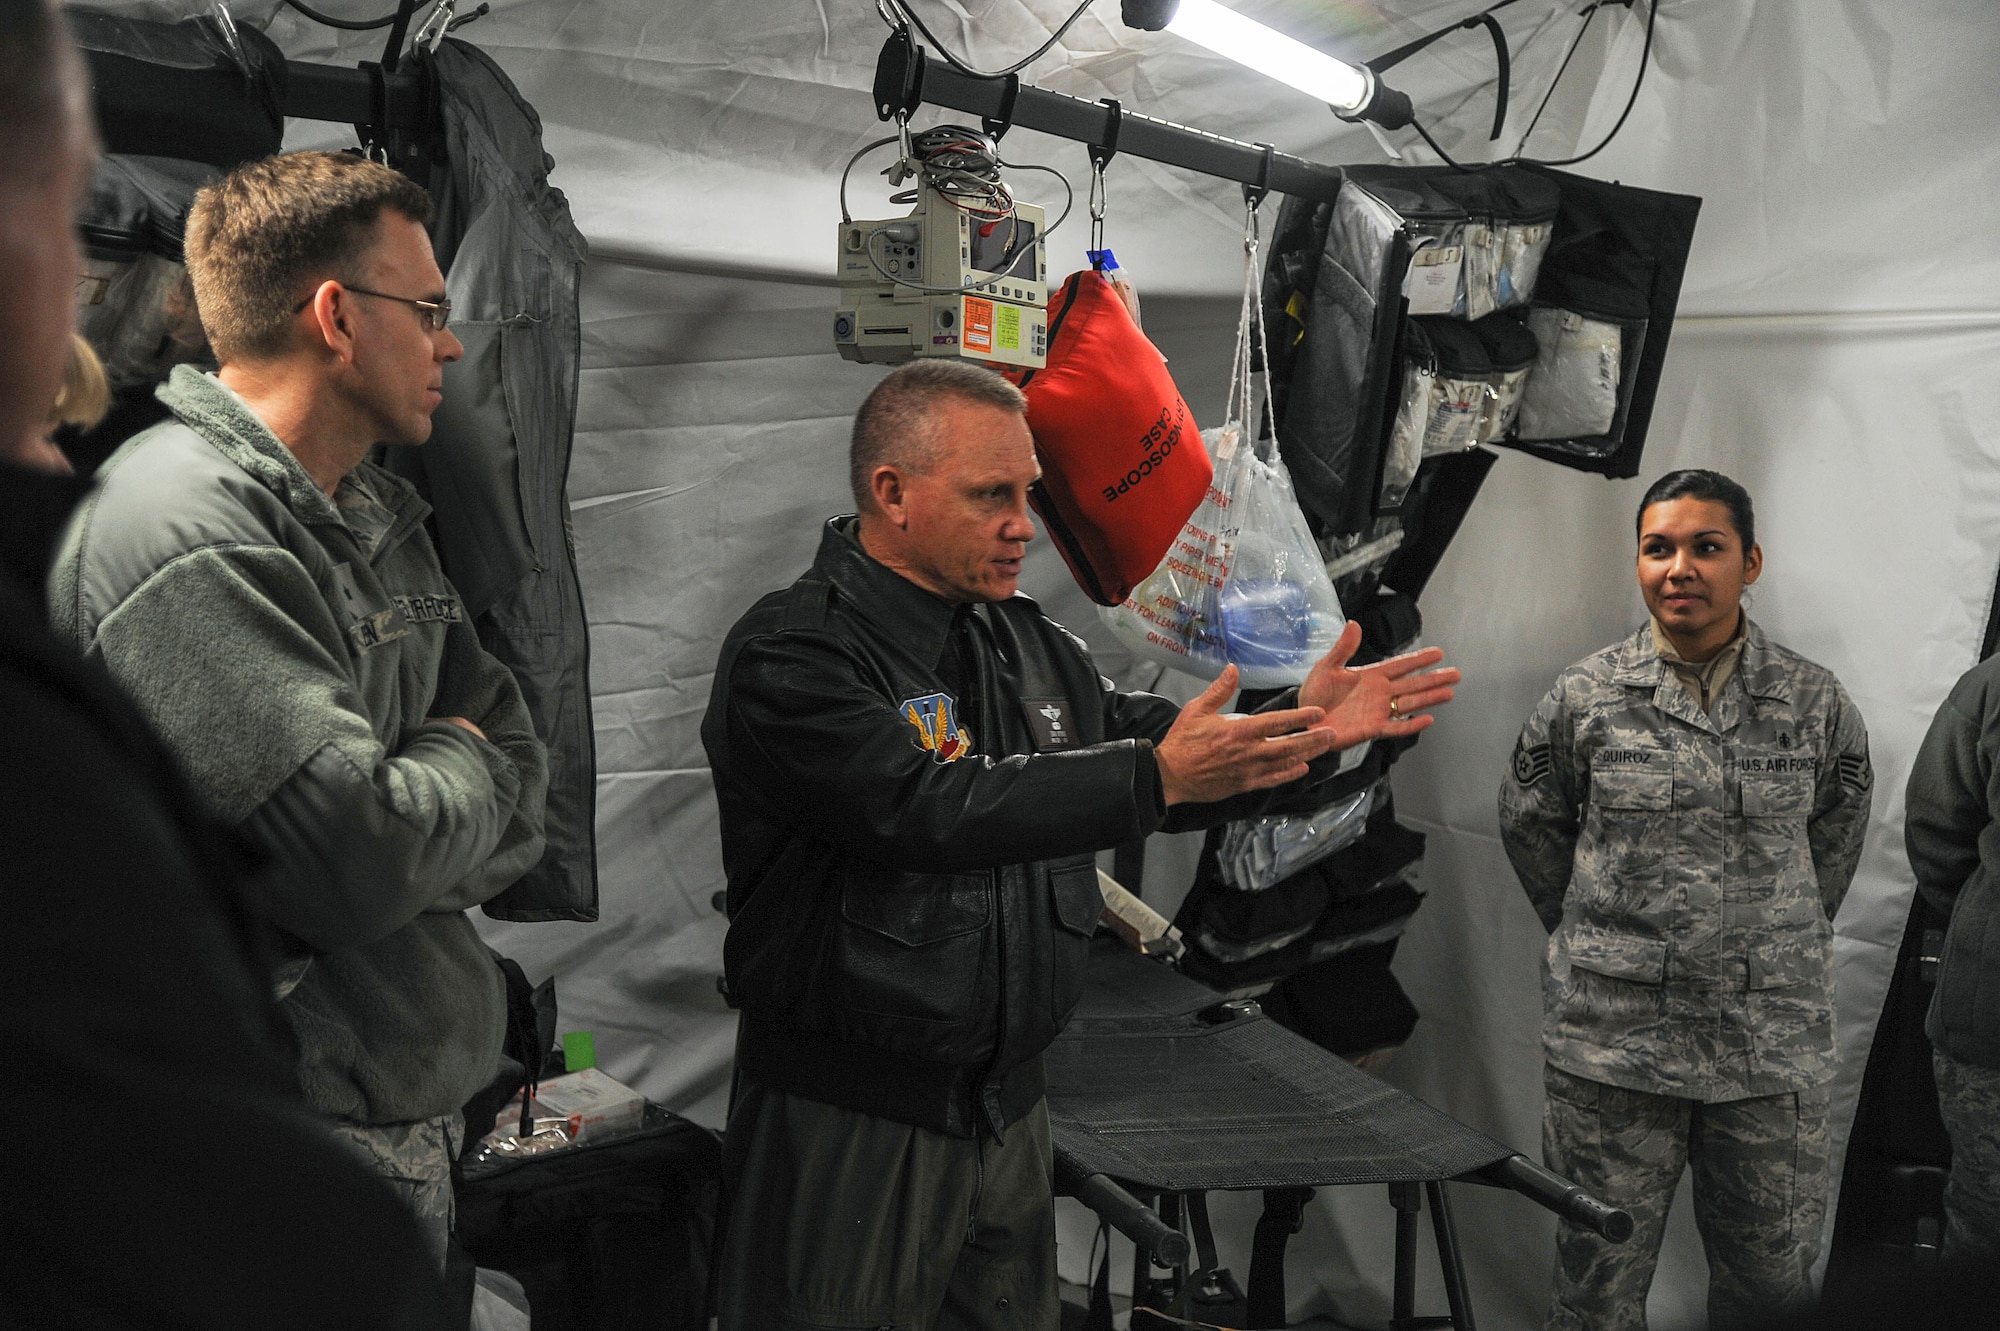 Brig. Gen. Daniel Wyman, Air Combat Command’s Command Surgeon, visited the Expeditionary Medical Support System exercise location on Langley AFB Va., 17 February, 2014. Wyman explained how useful the Expeditionary Medical Support System is to deployed environments. (U.S. Air Force photo by Staff Sgt. Steve Stanley/Released)